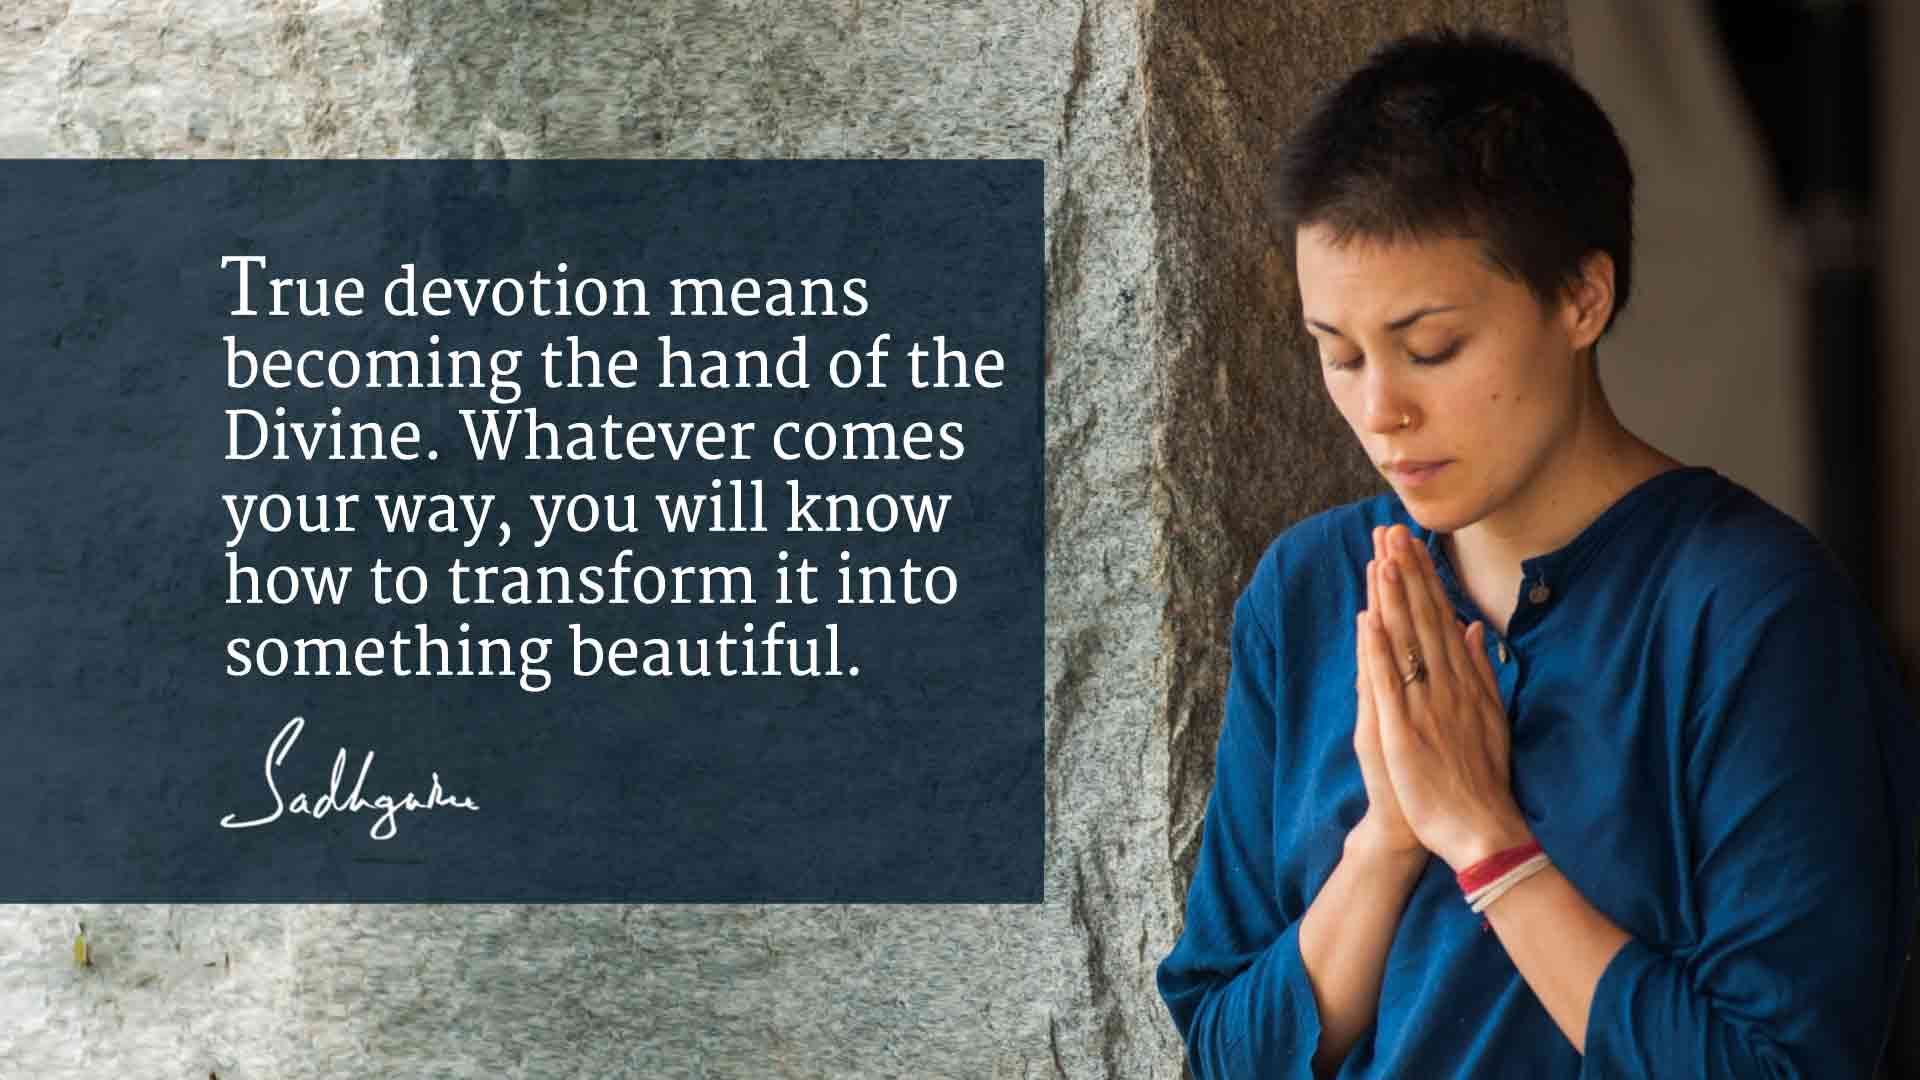 7 Quotes on Devotion from Sadhguru